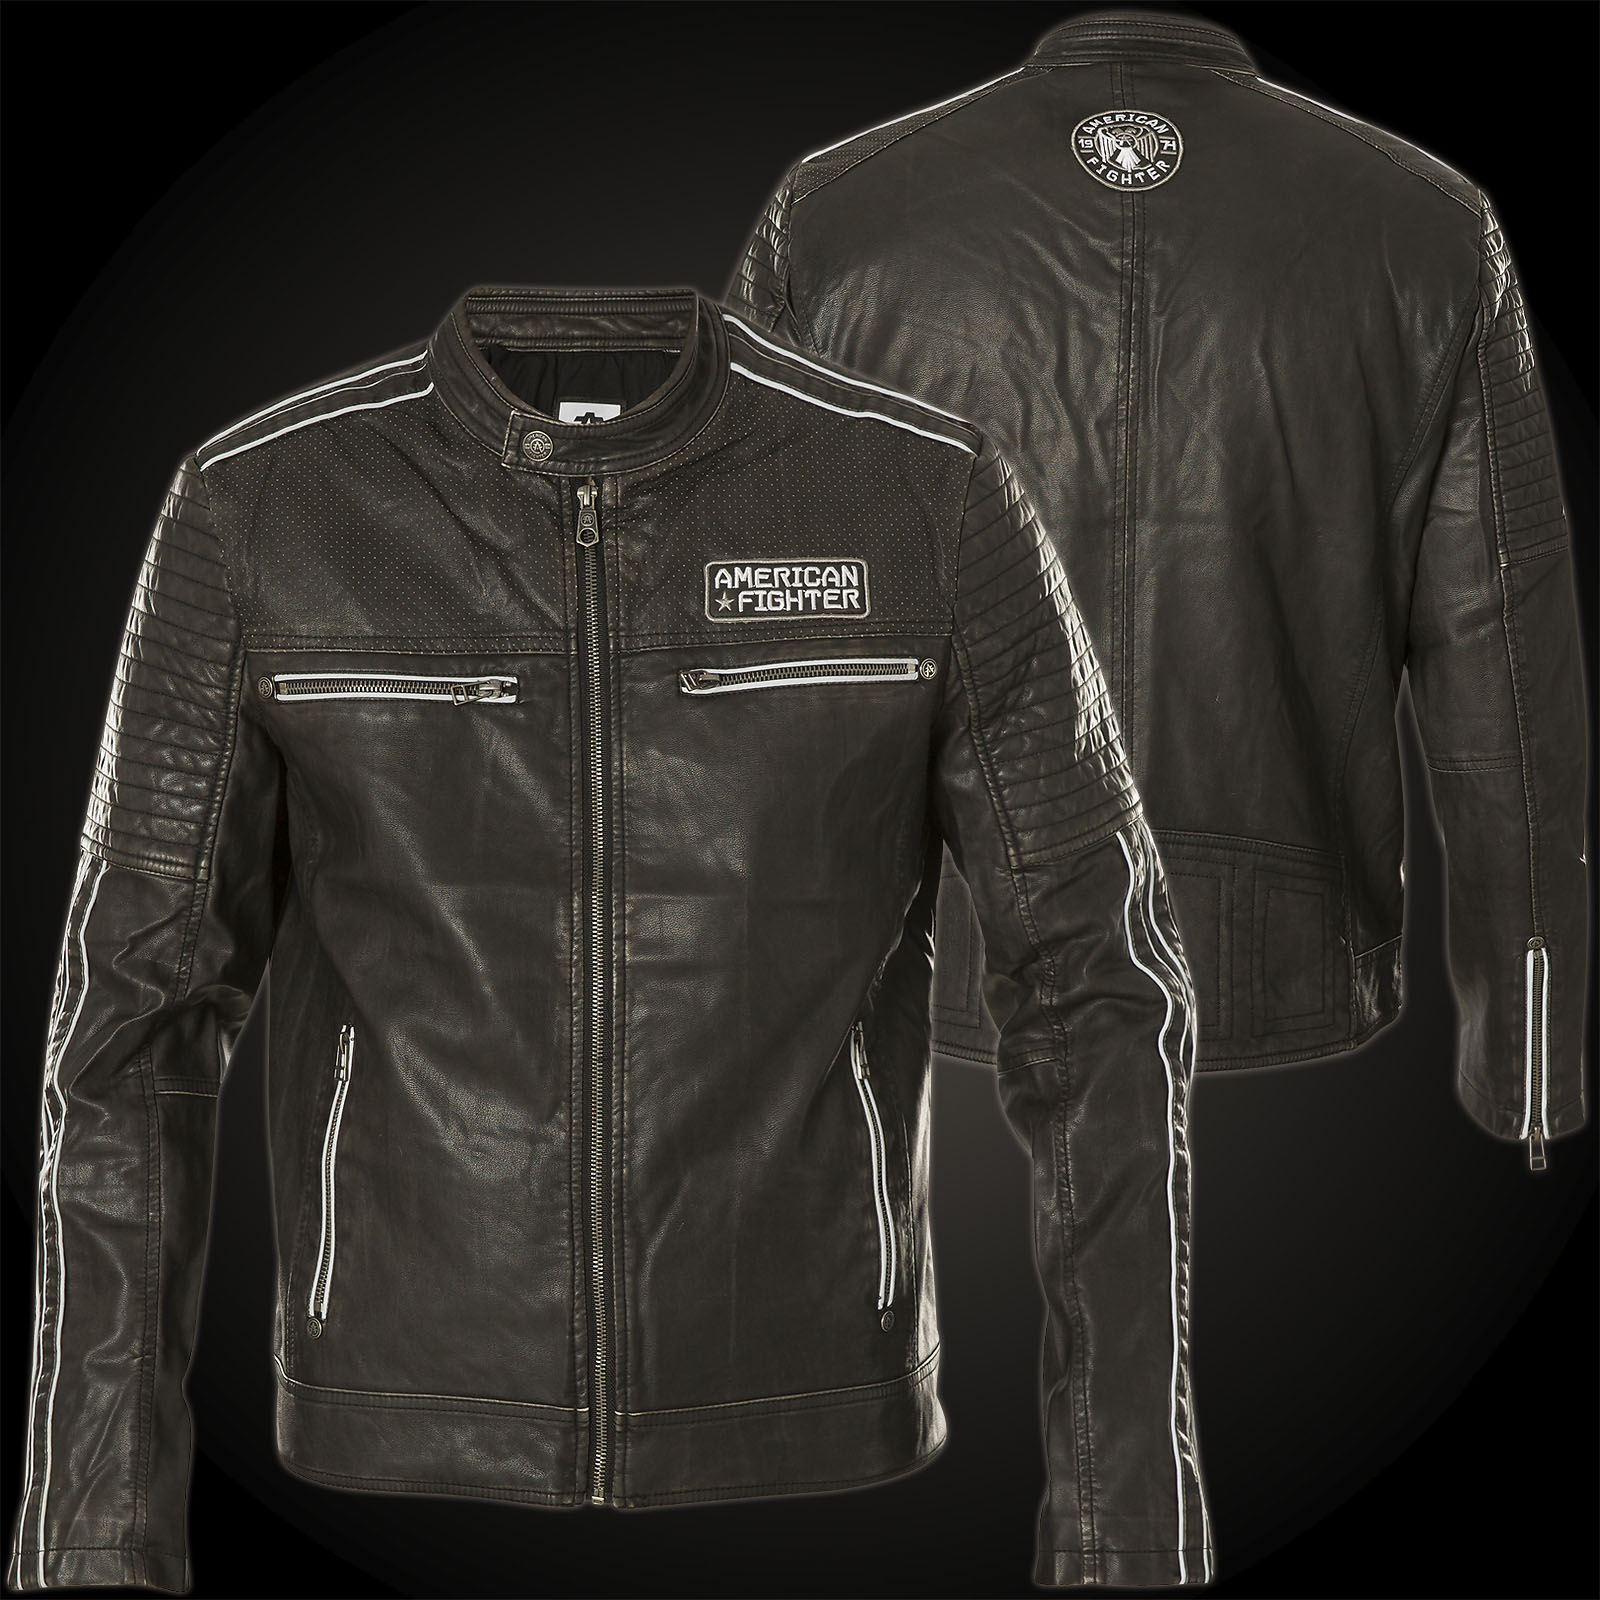 American Fighter by Affliction Biker style jacket made of faux leather